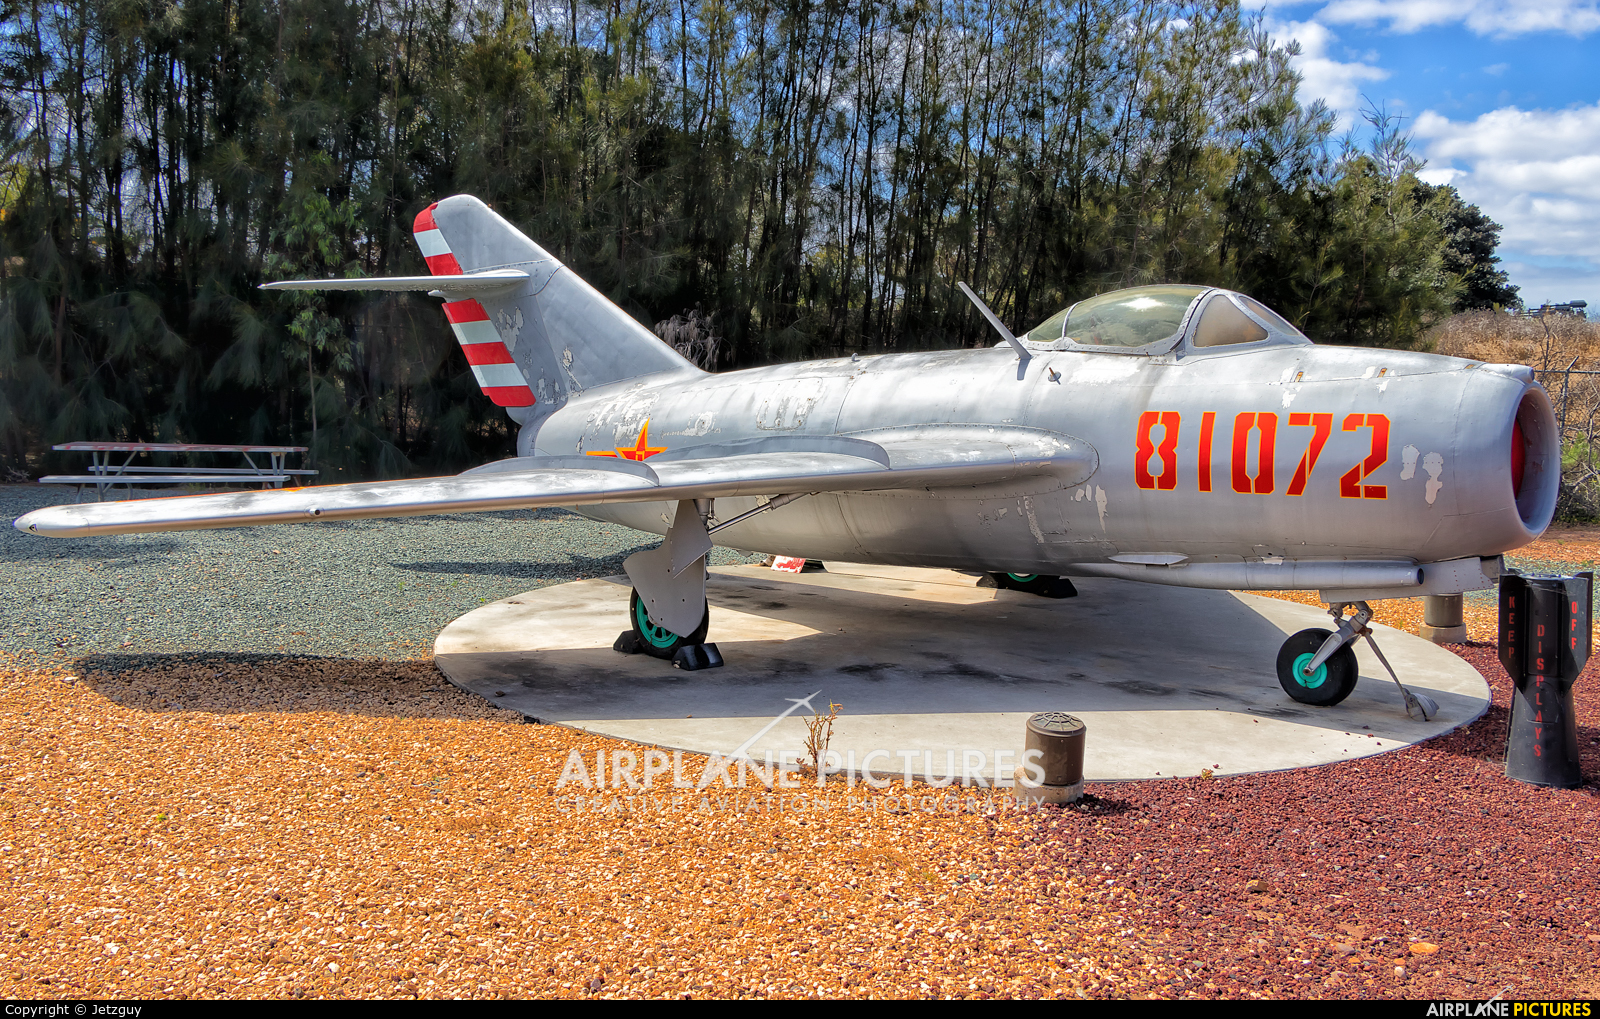 China - Air Force 81072 aircraft at Miramar MCAS - Flying Leatherneck Aviation Museum